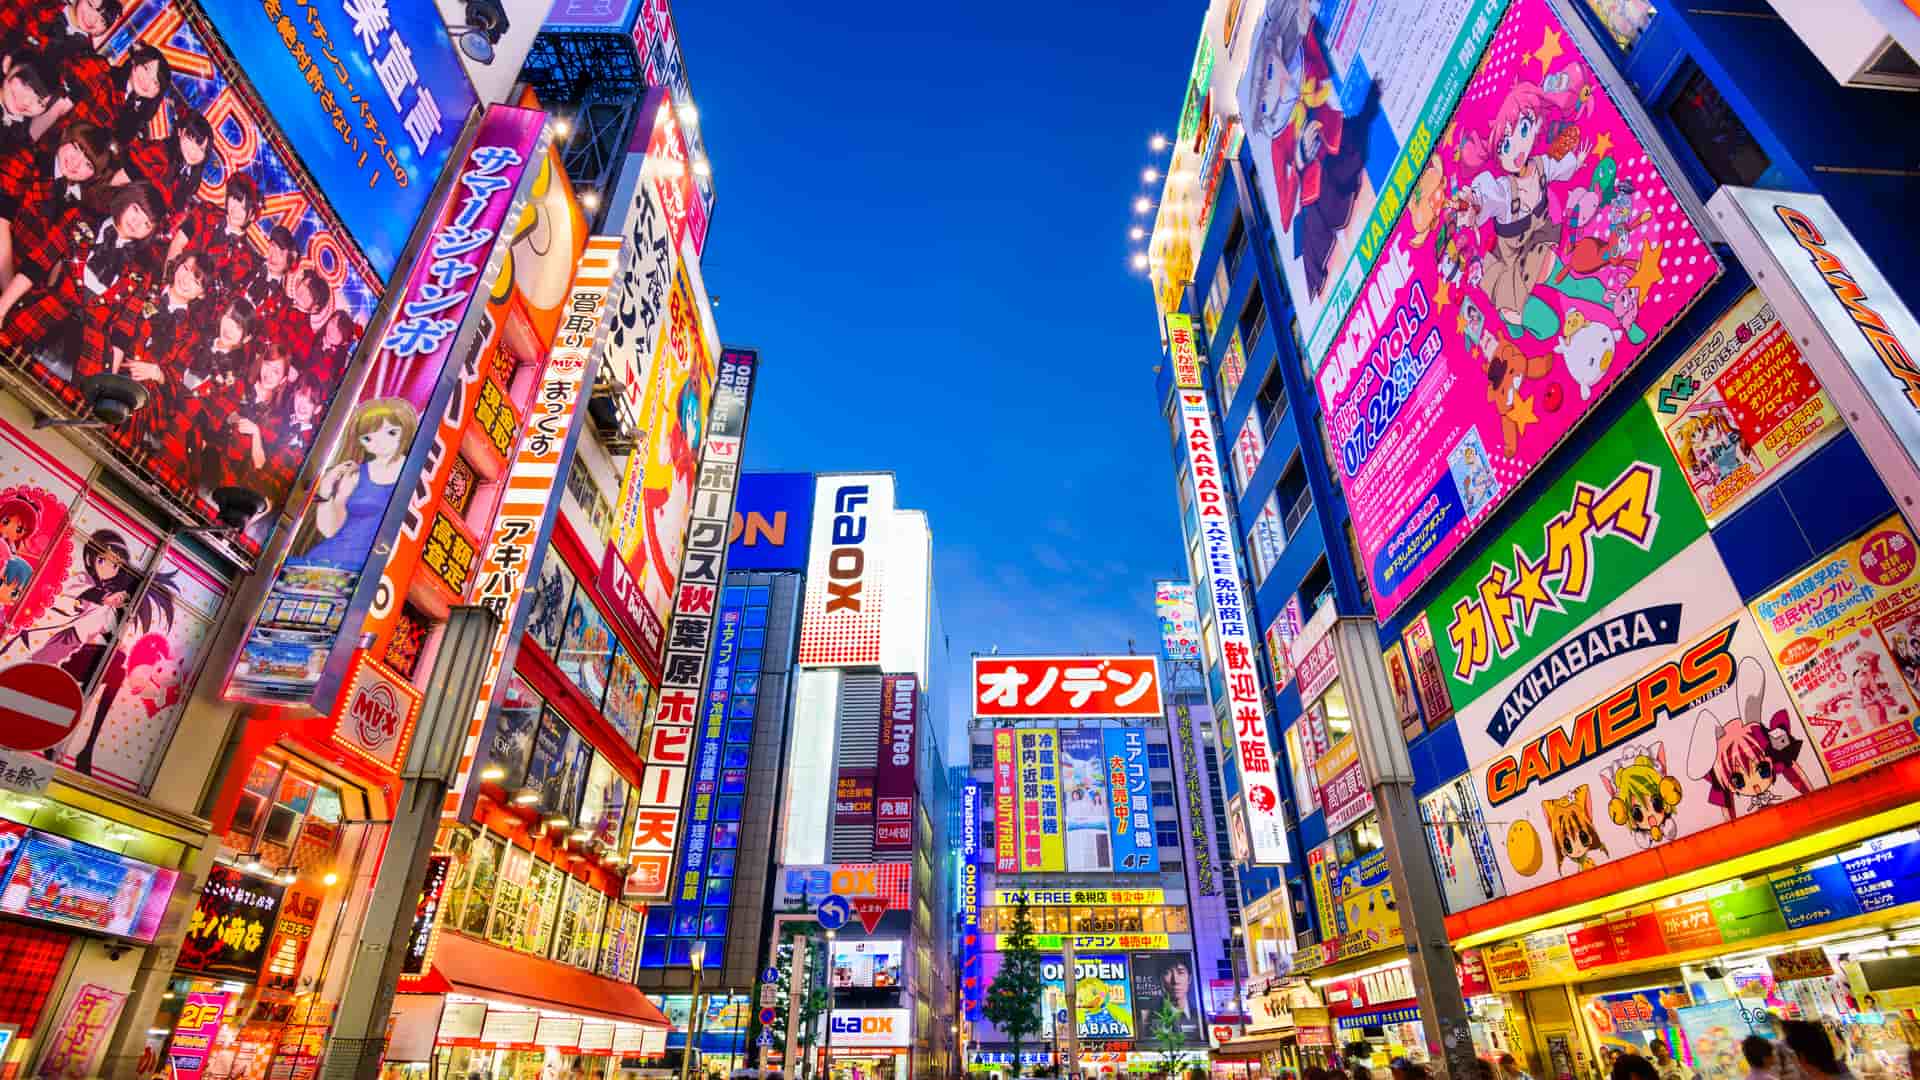 Street view of Tokio to present the international deals in this japanese city